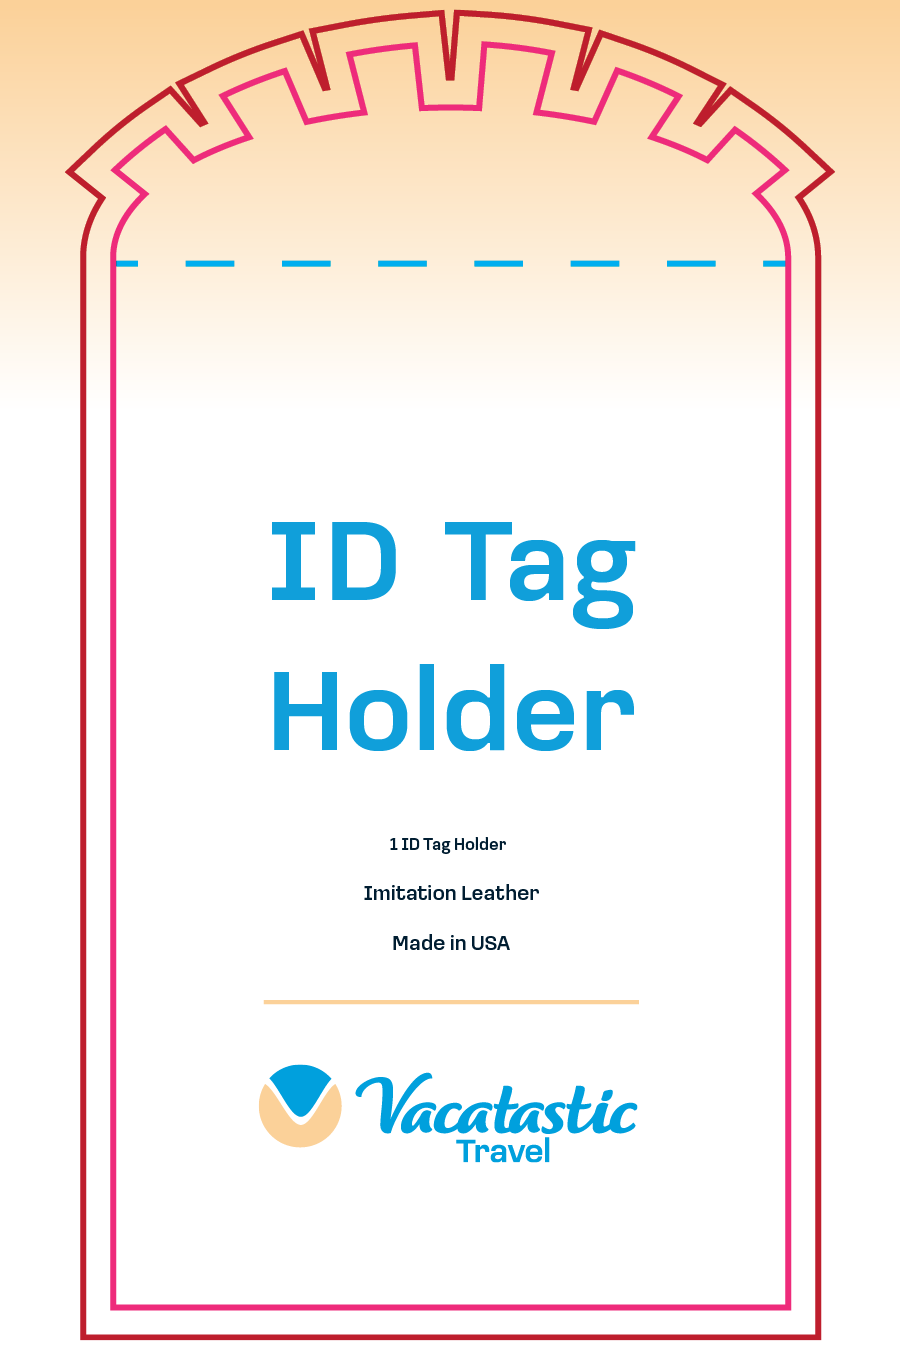 First version of the front of the ID tag